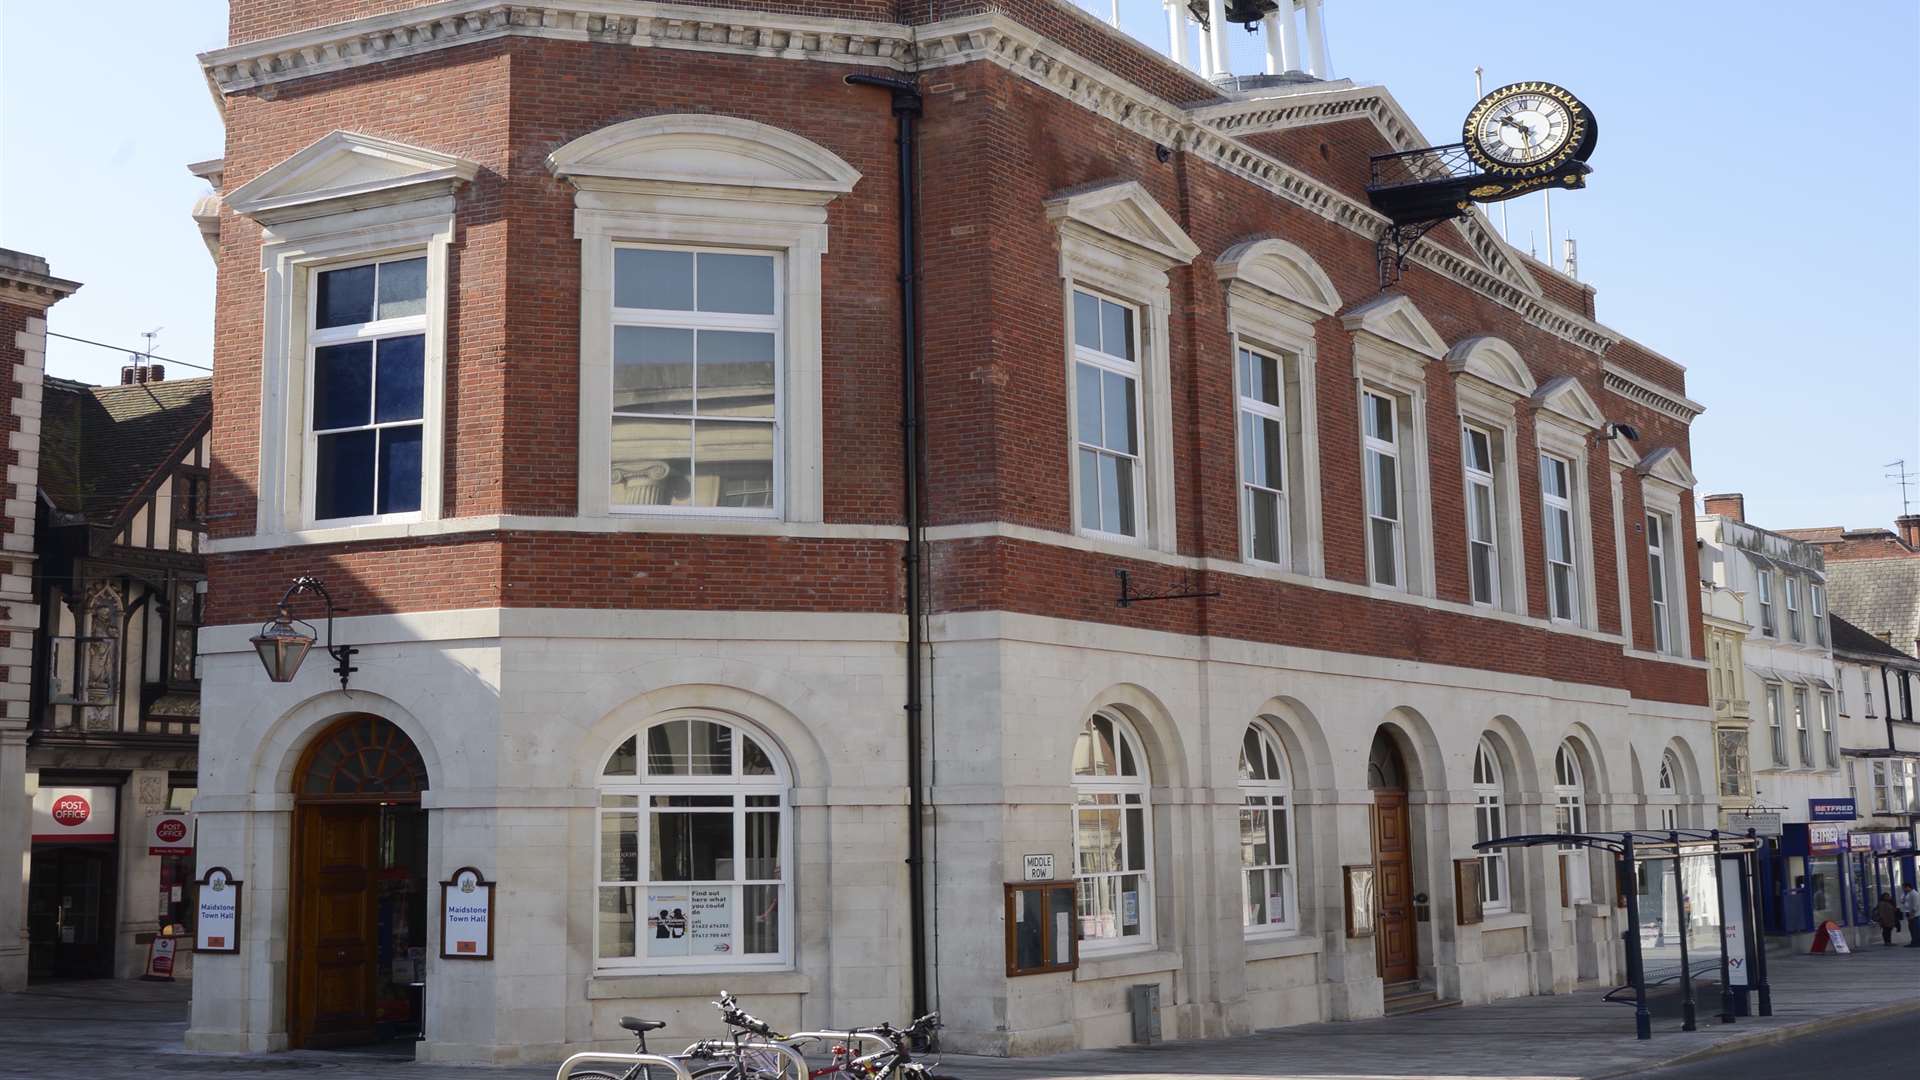 Maidstone town hall